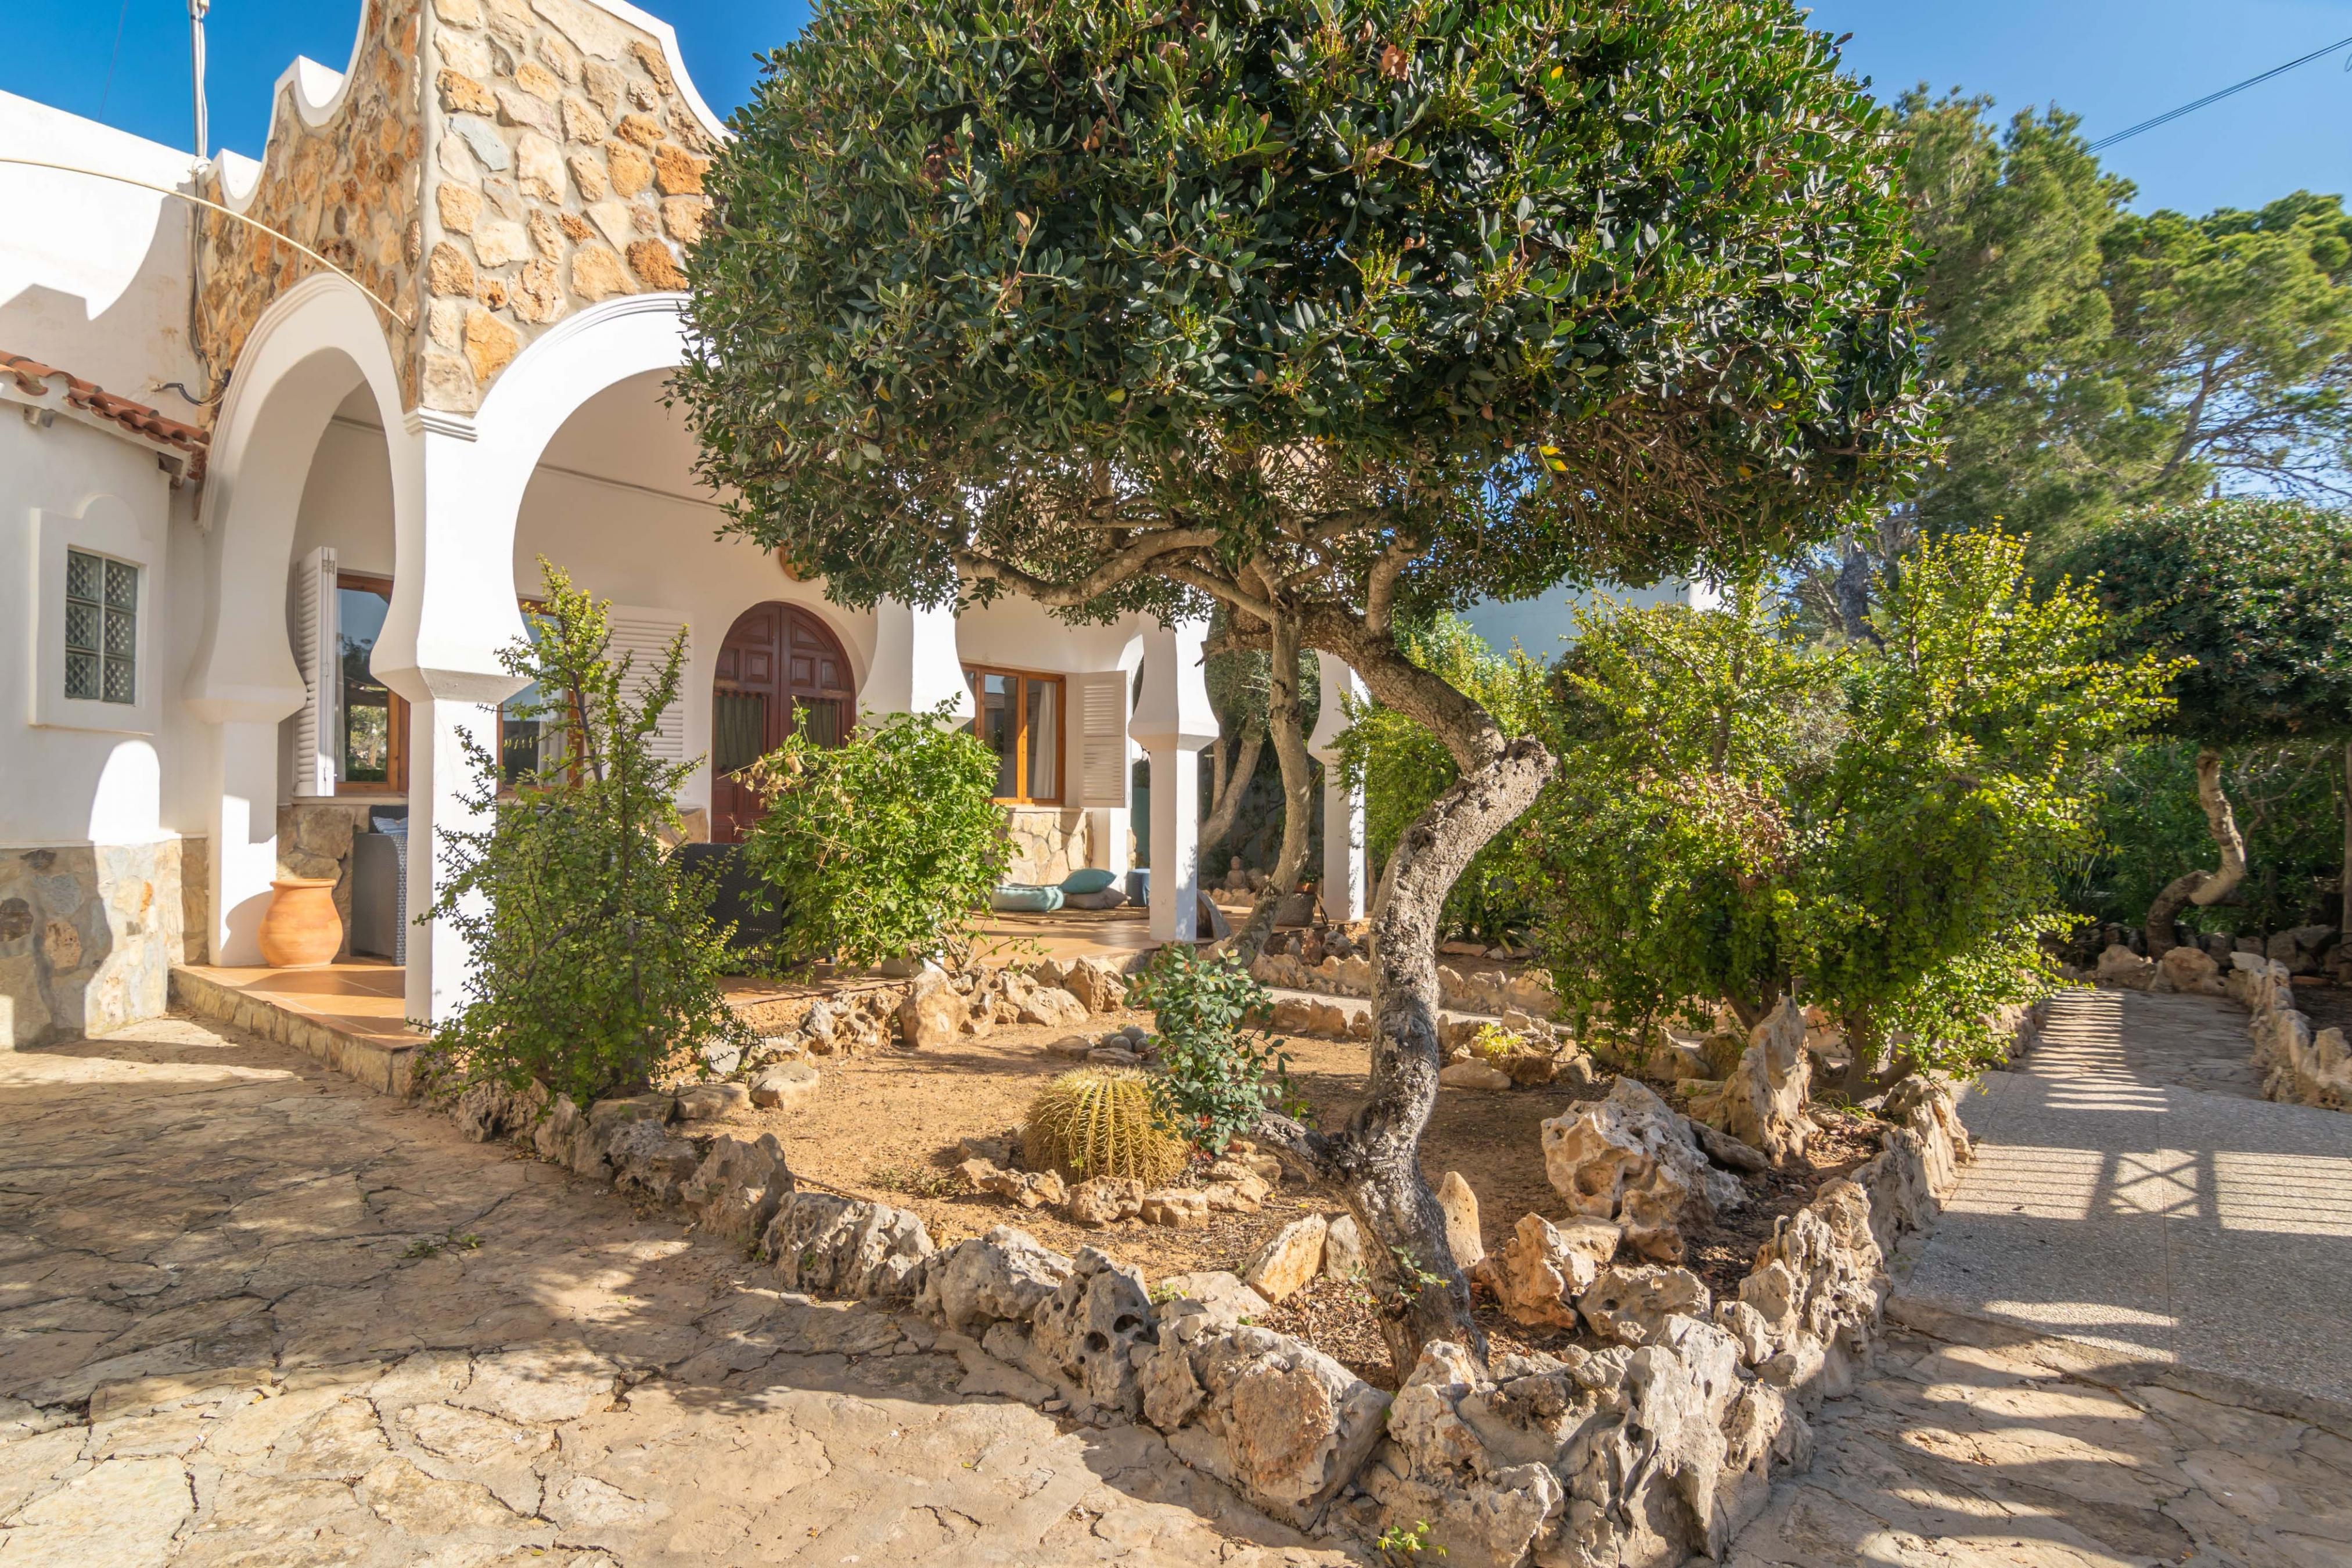 Property Image 1 - SOL I VENT - Chalet for 8 people in Cala Llombards. Free WiFi